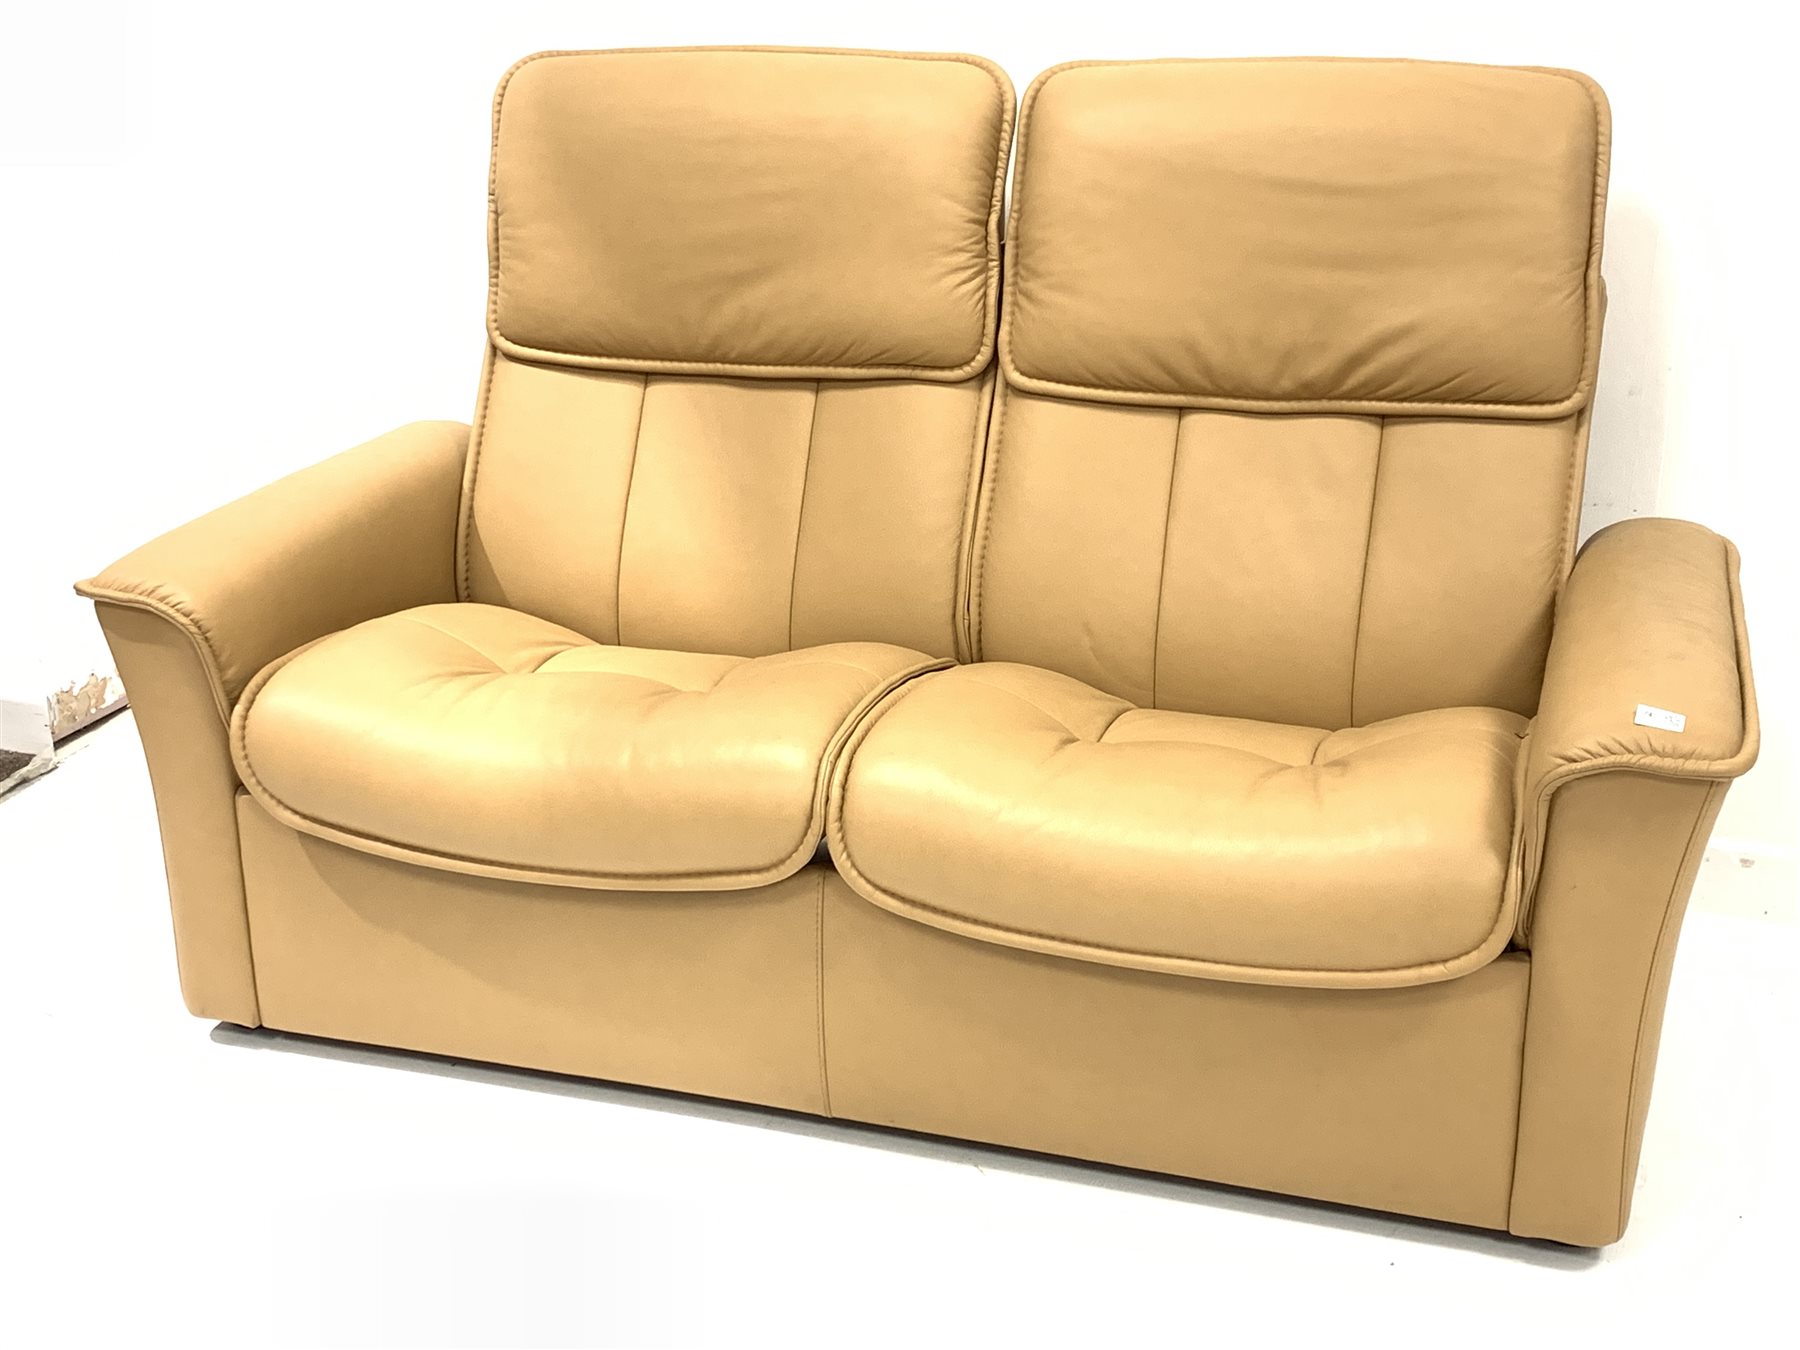 stressless euro style reclining leather sofa